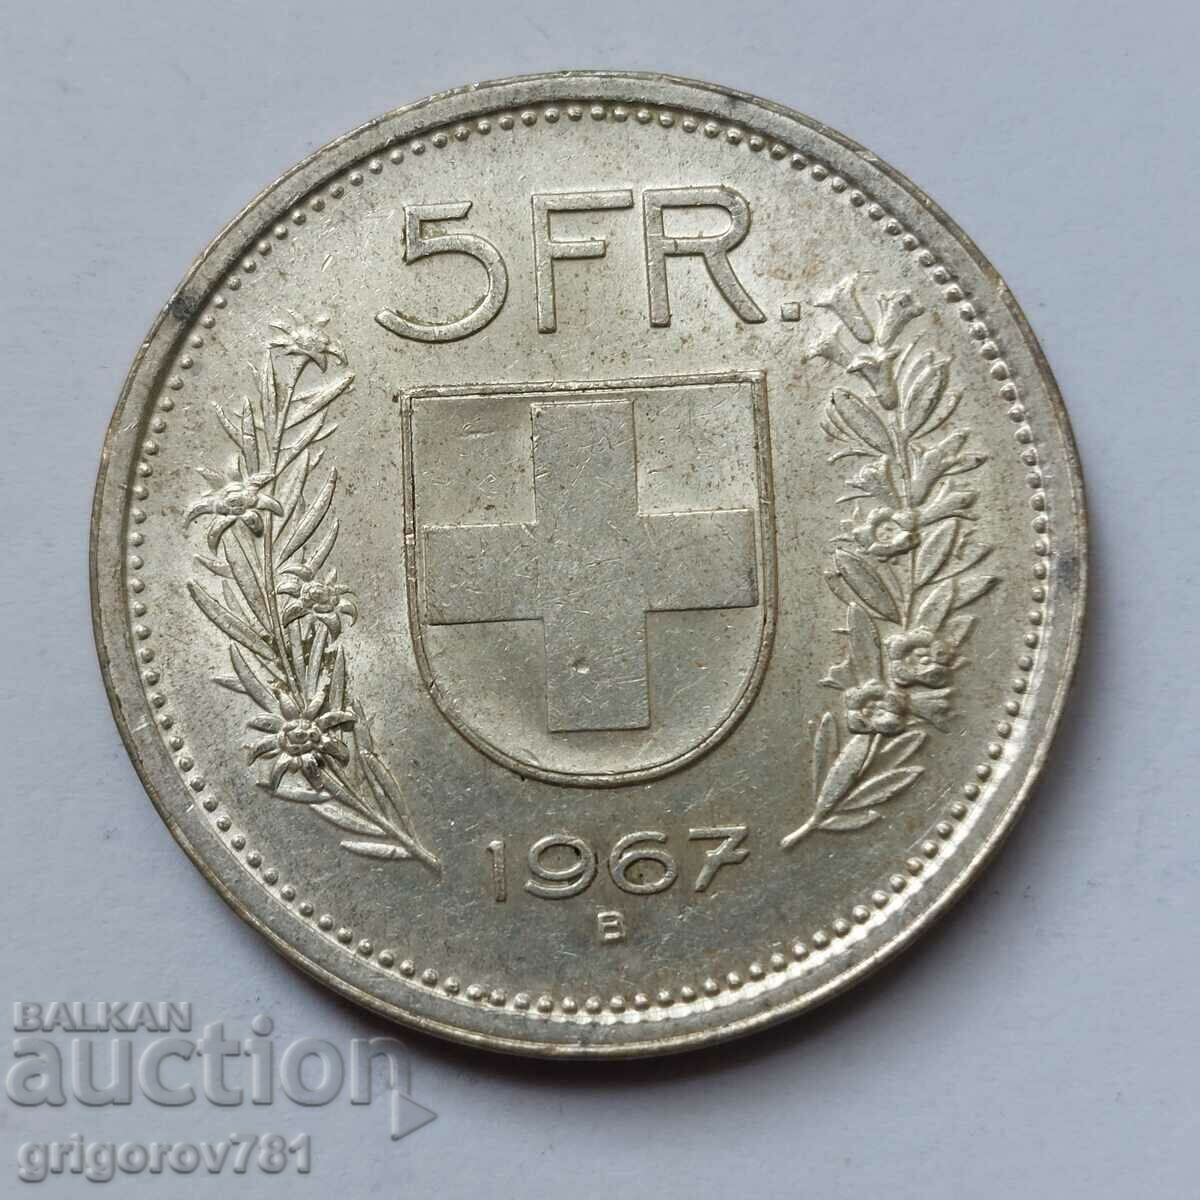 5 Francs Silver Switzerland 1967 B - Silver Coin #11